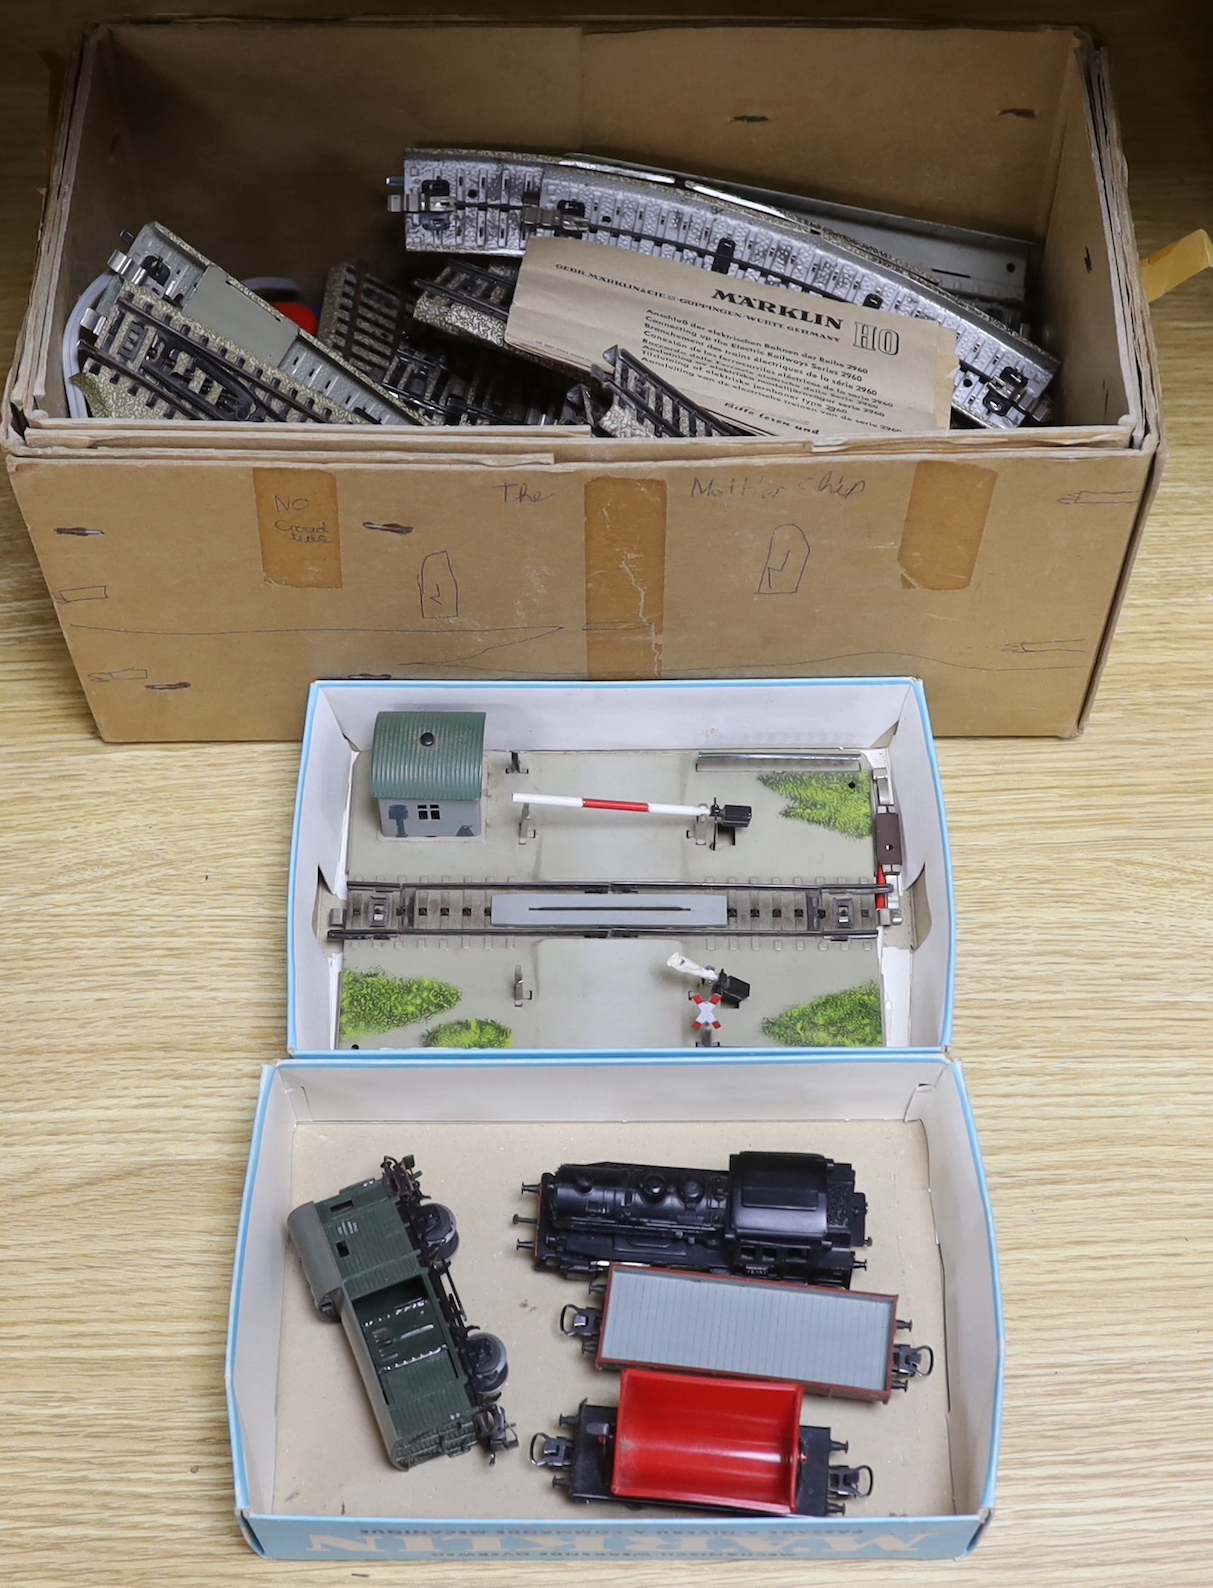 A German Marklin 7390 miniature rail station, tracking, engine and carriages, with original booklet